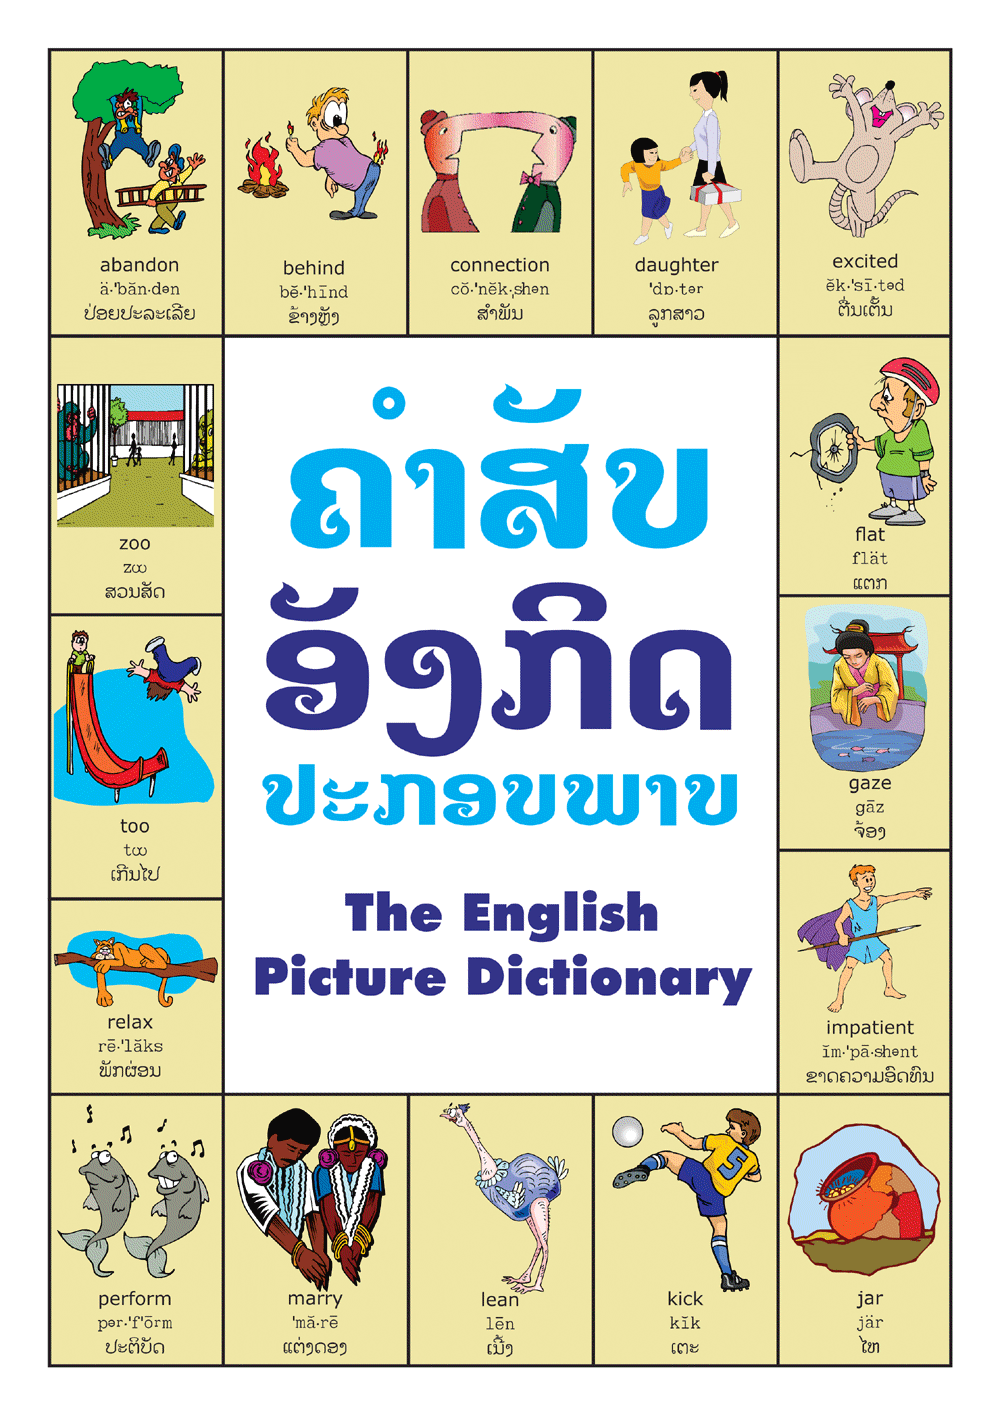 The English Picture Dictionary large book cover, published in Lao and English